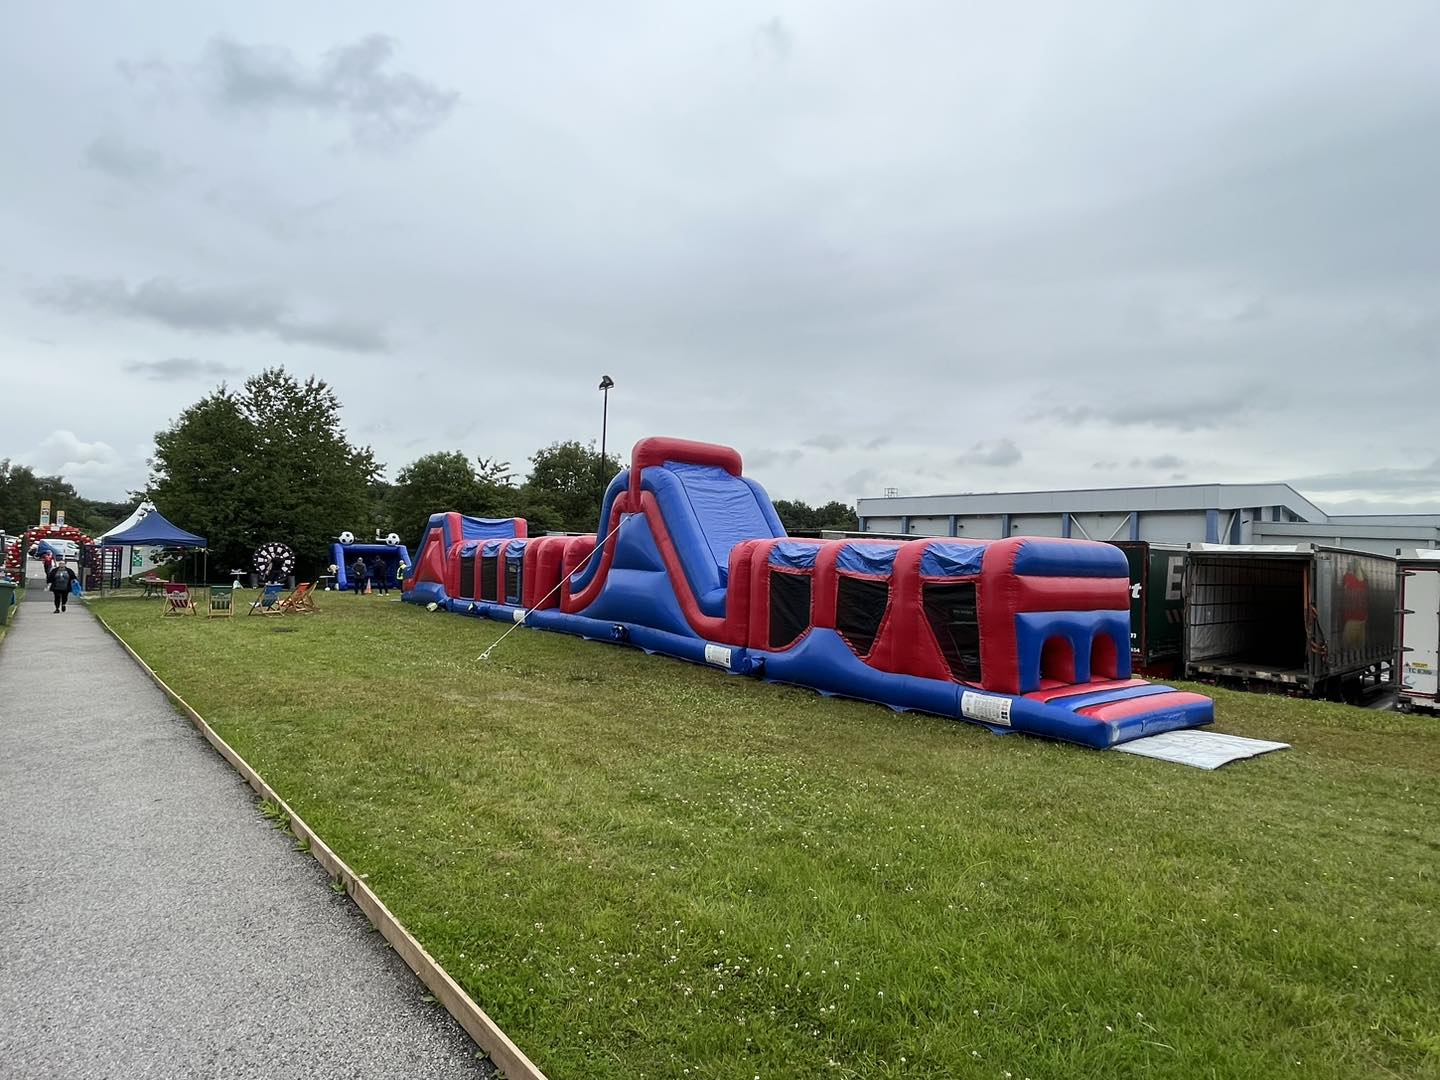 This image shows a selection of inflatable and fun products on hire at Walkers Snack Foods Factory in Skelmersdale, UK